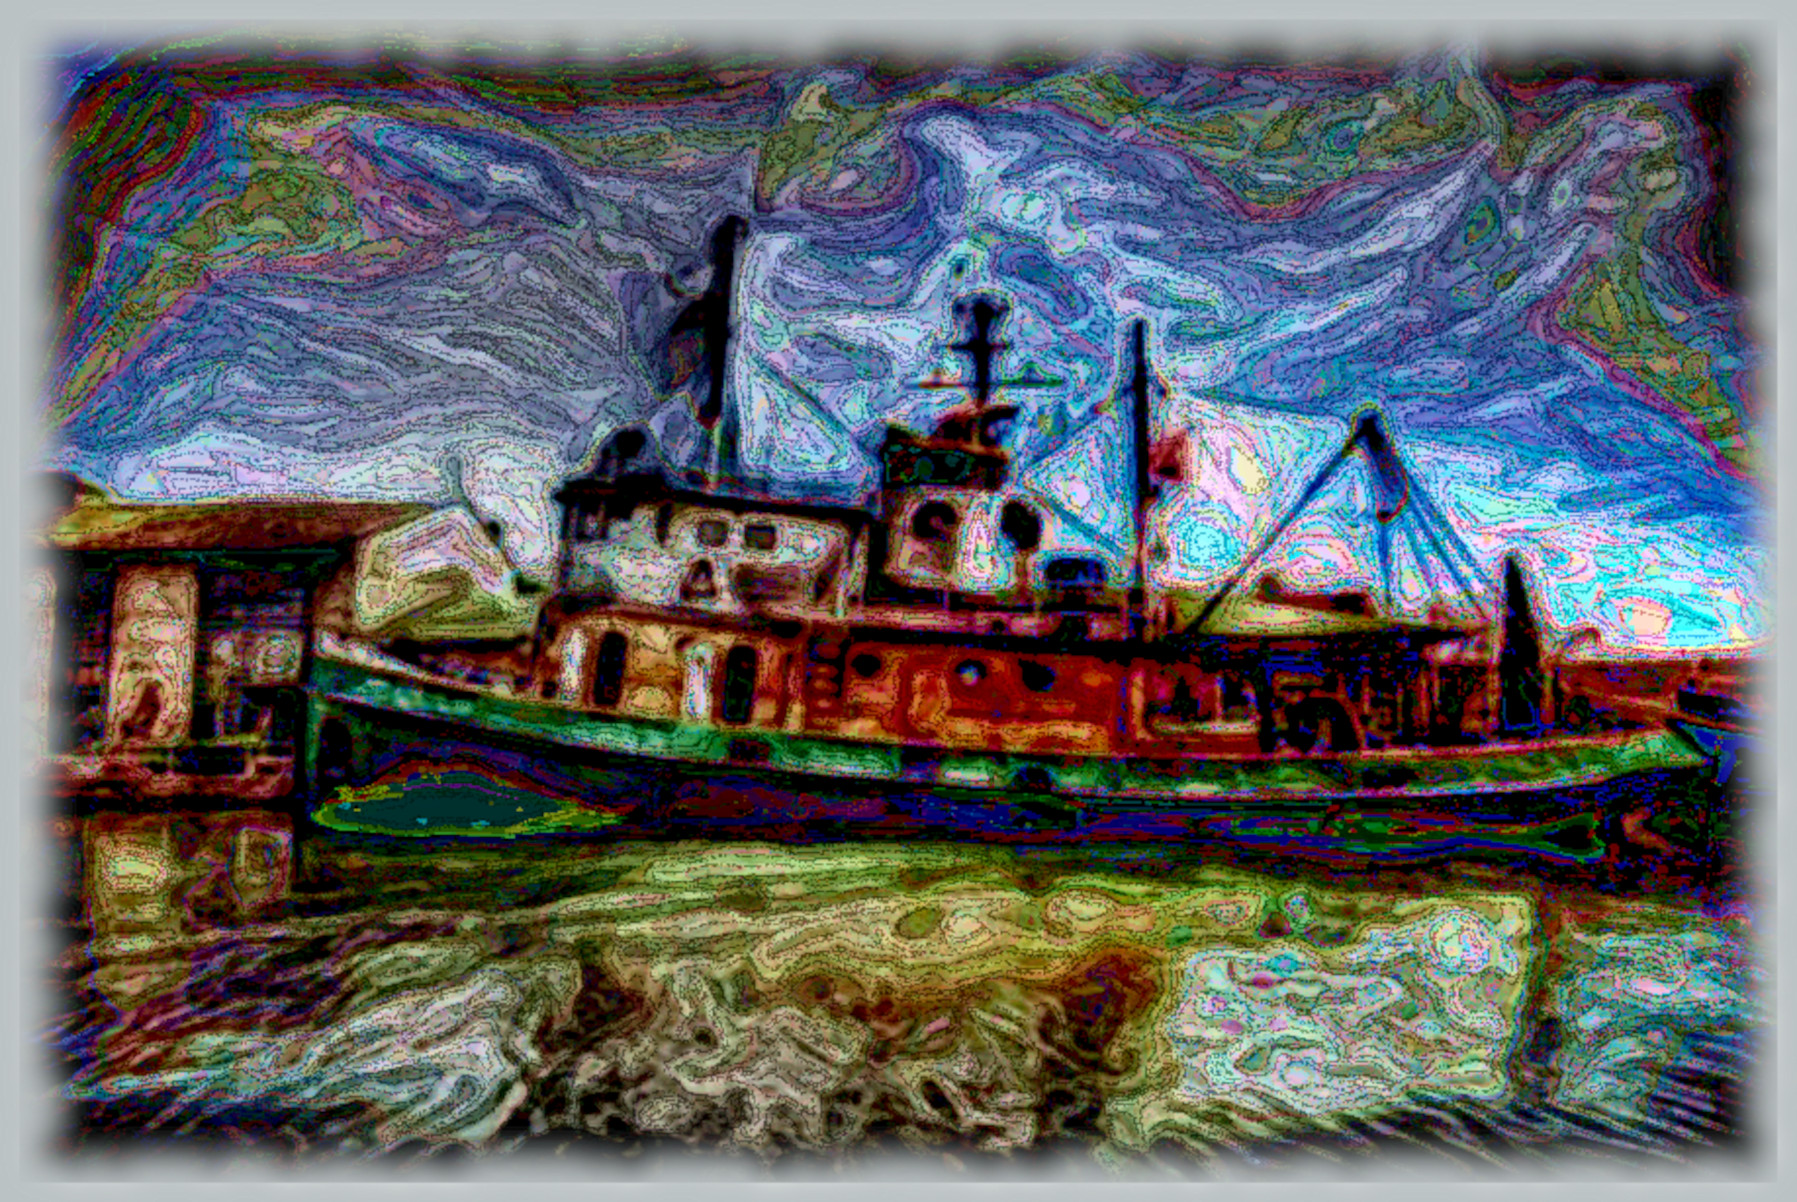 boat_on_the_river_ii_hdr_by_isik5_d26ihc0-DN_DrawEffect_O.jpg